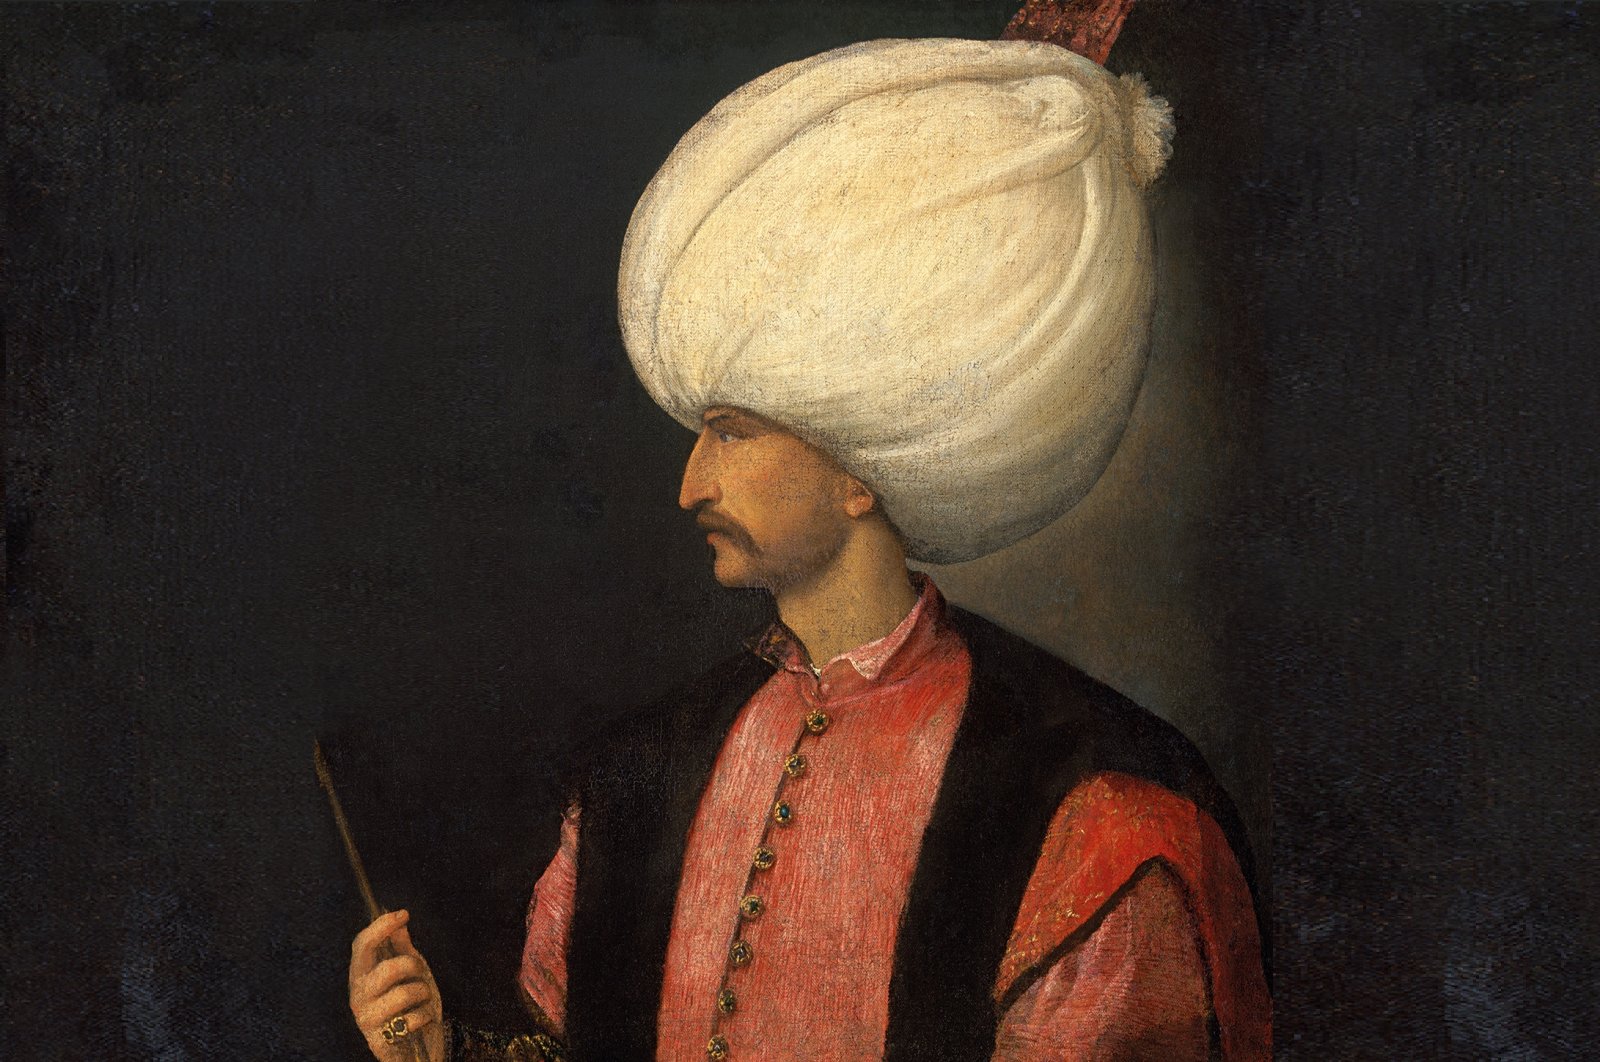 The portrait of Suleiman the Magnificent attributed to Italian painter Titian, oil on canvas, 99 by 85 centimeters, selected from Kunsthistorisches Museum, Vienna, Austria. (Courtesy of SSM)